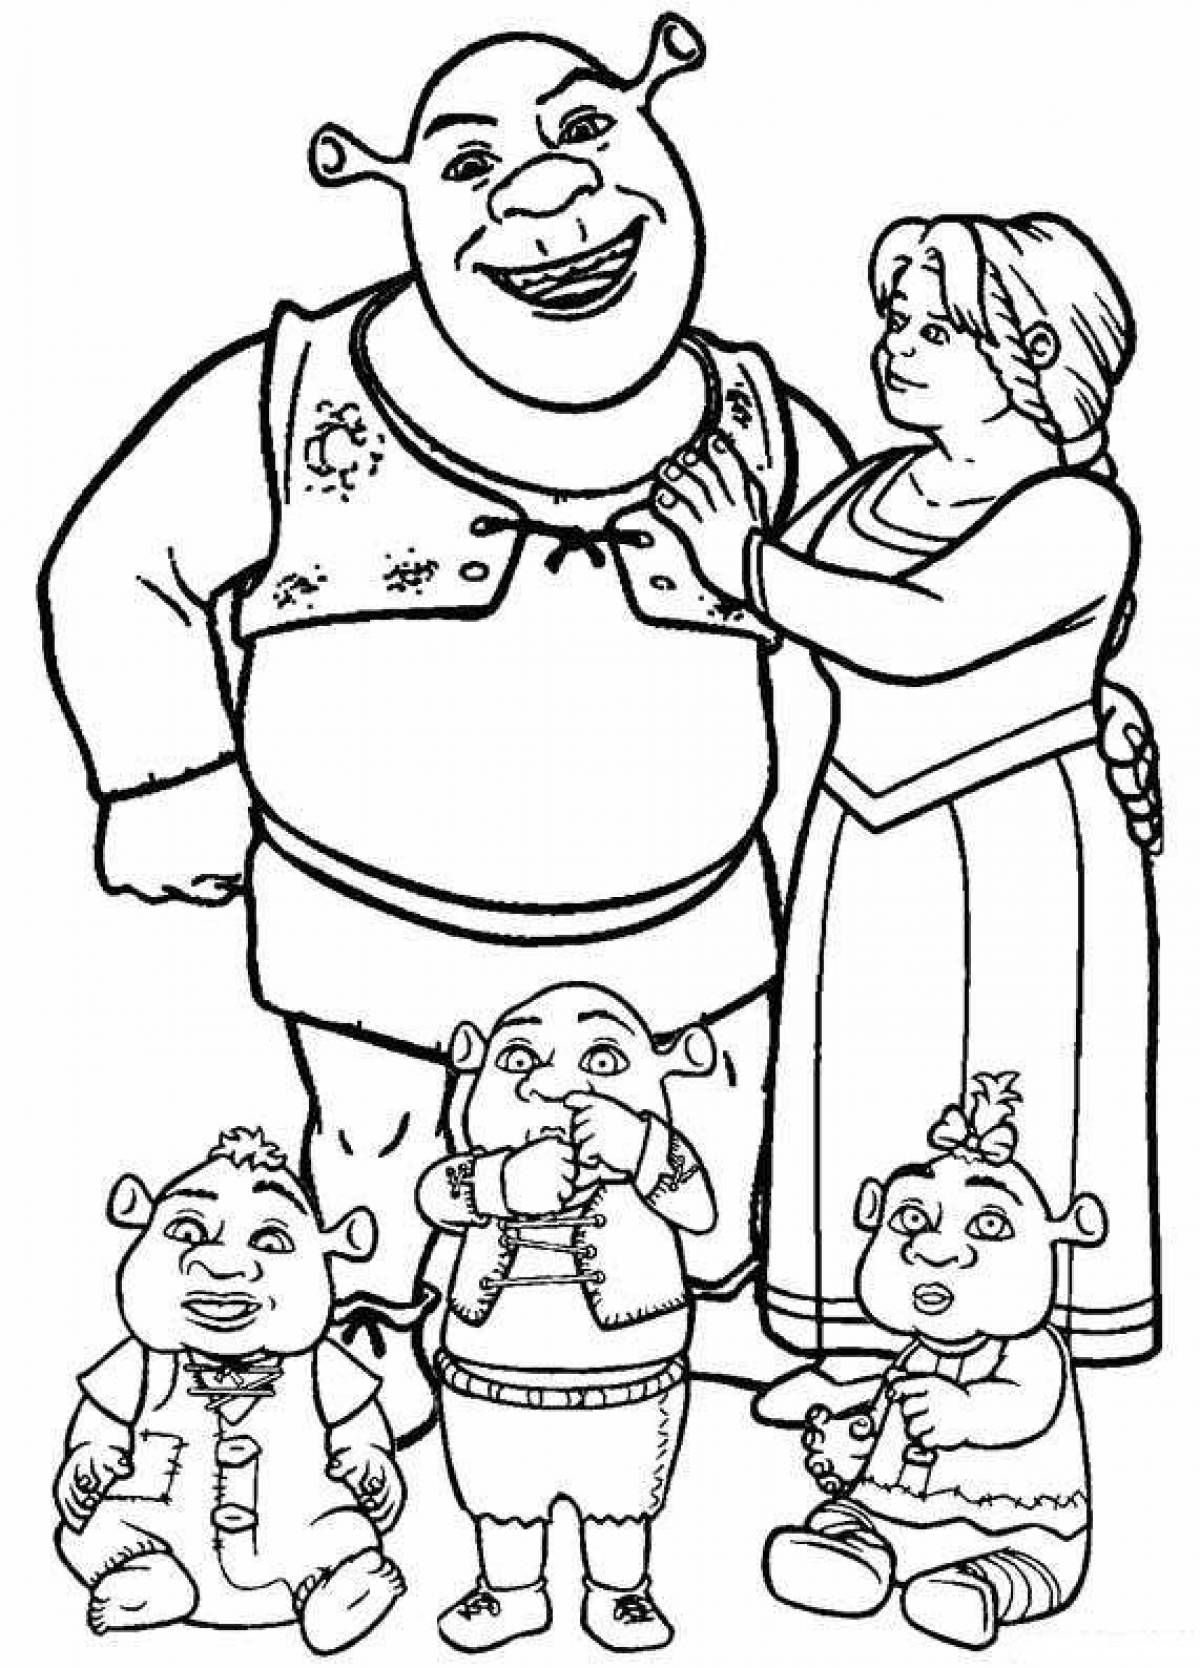 Shrek's amazing coloring page